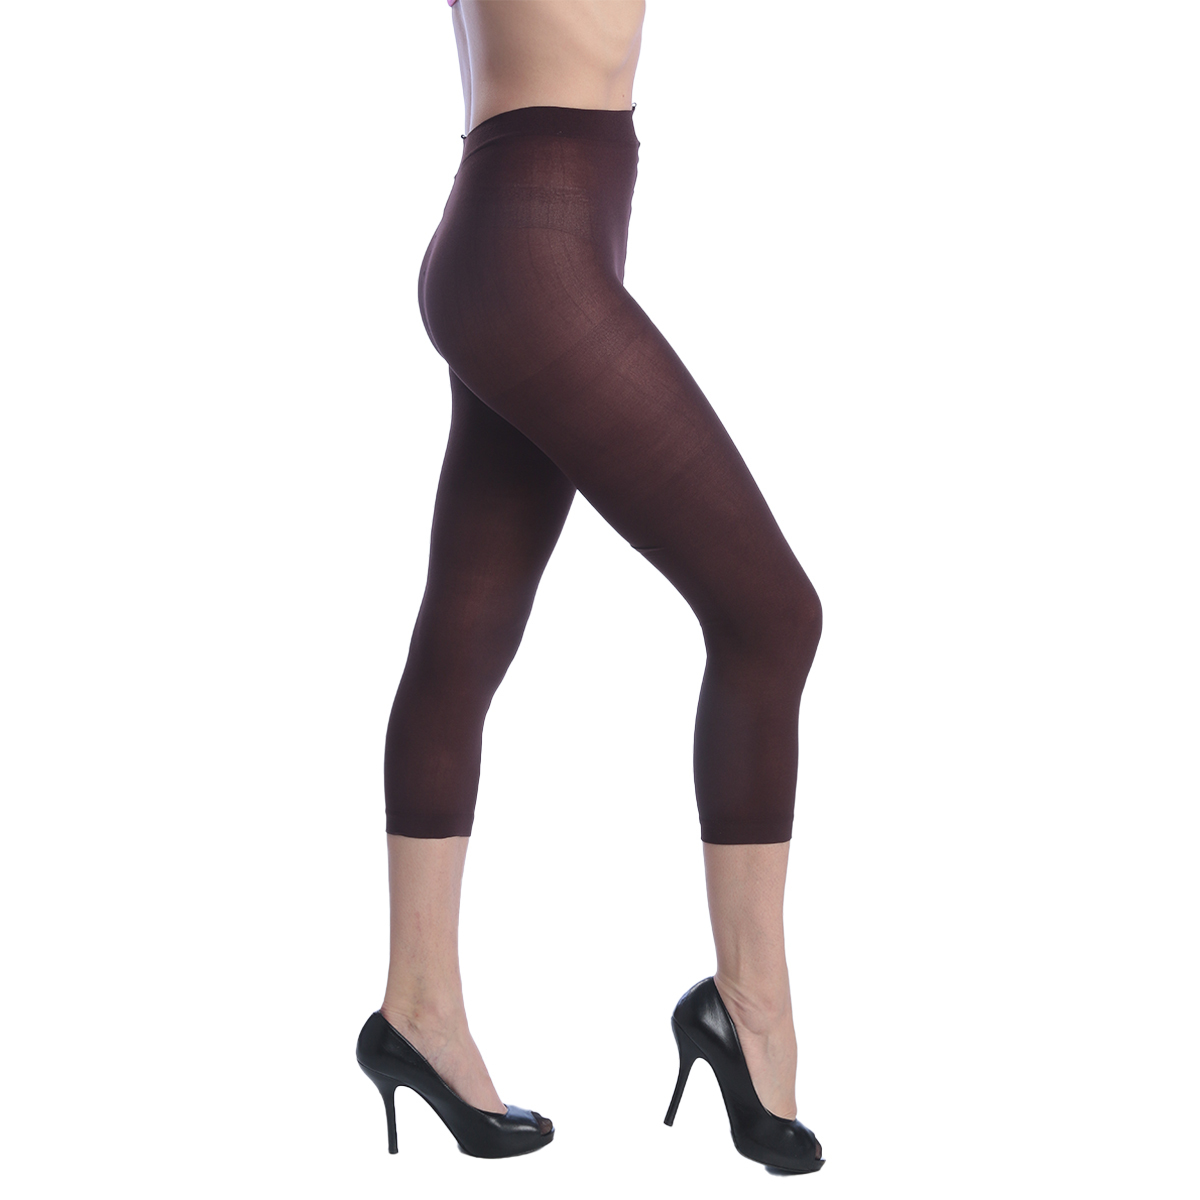 Women's Opaque Footless Capri Tights - Assorted Colors & 2 Sizes